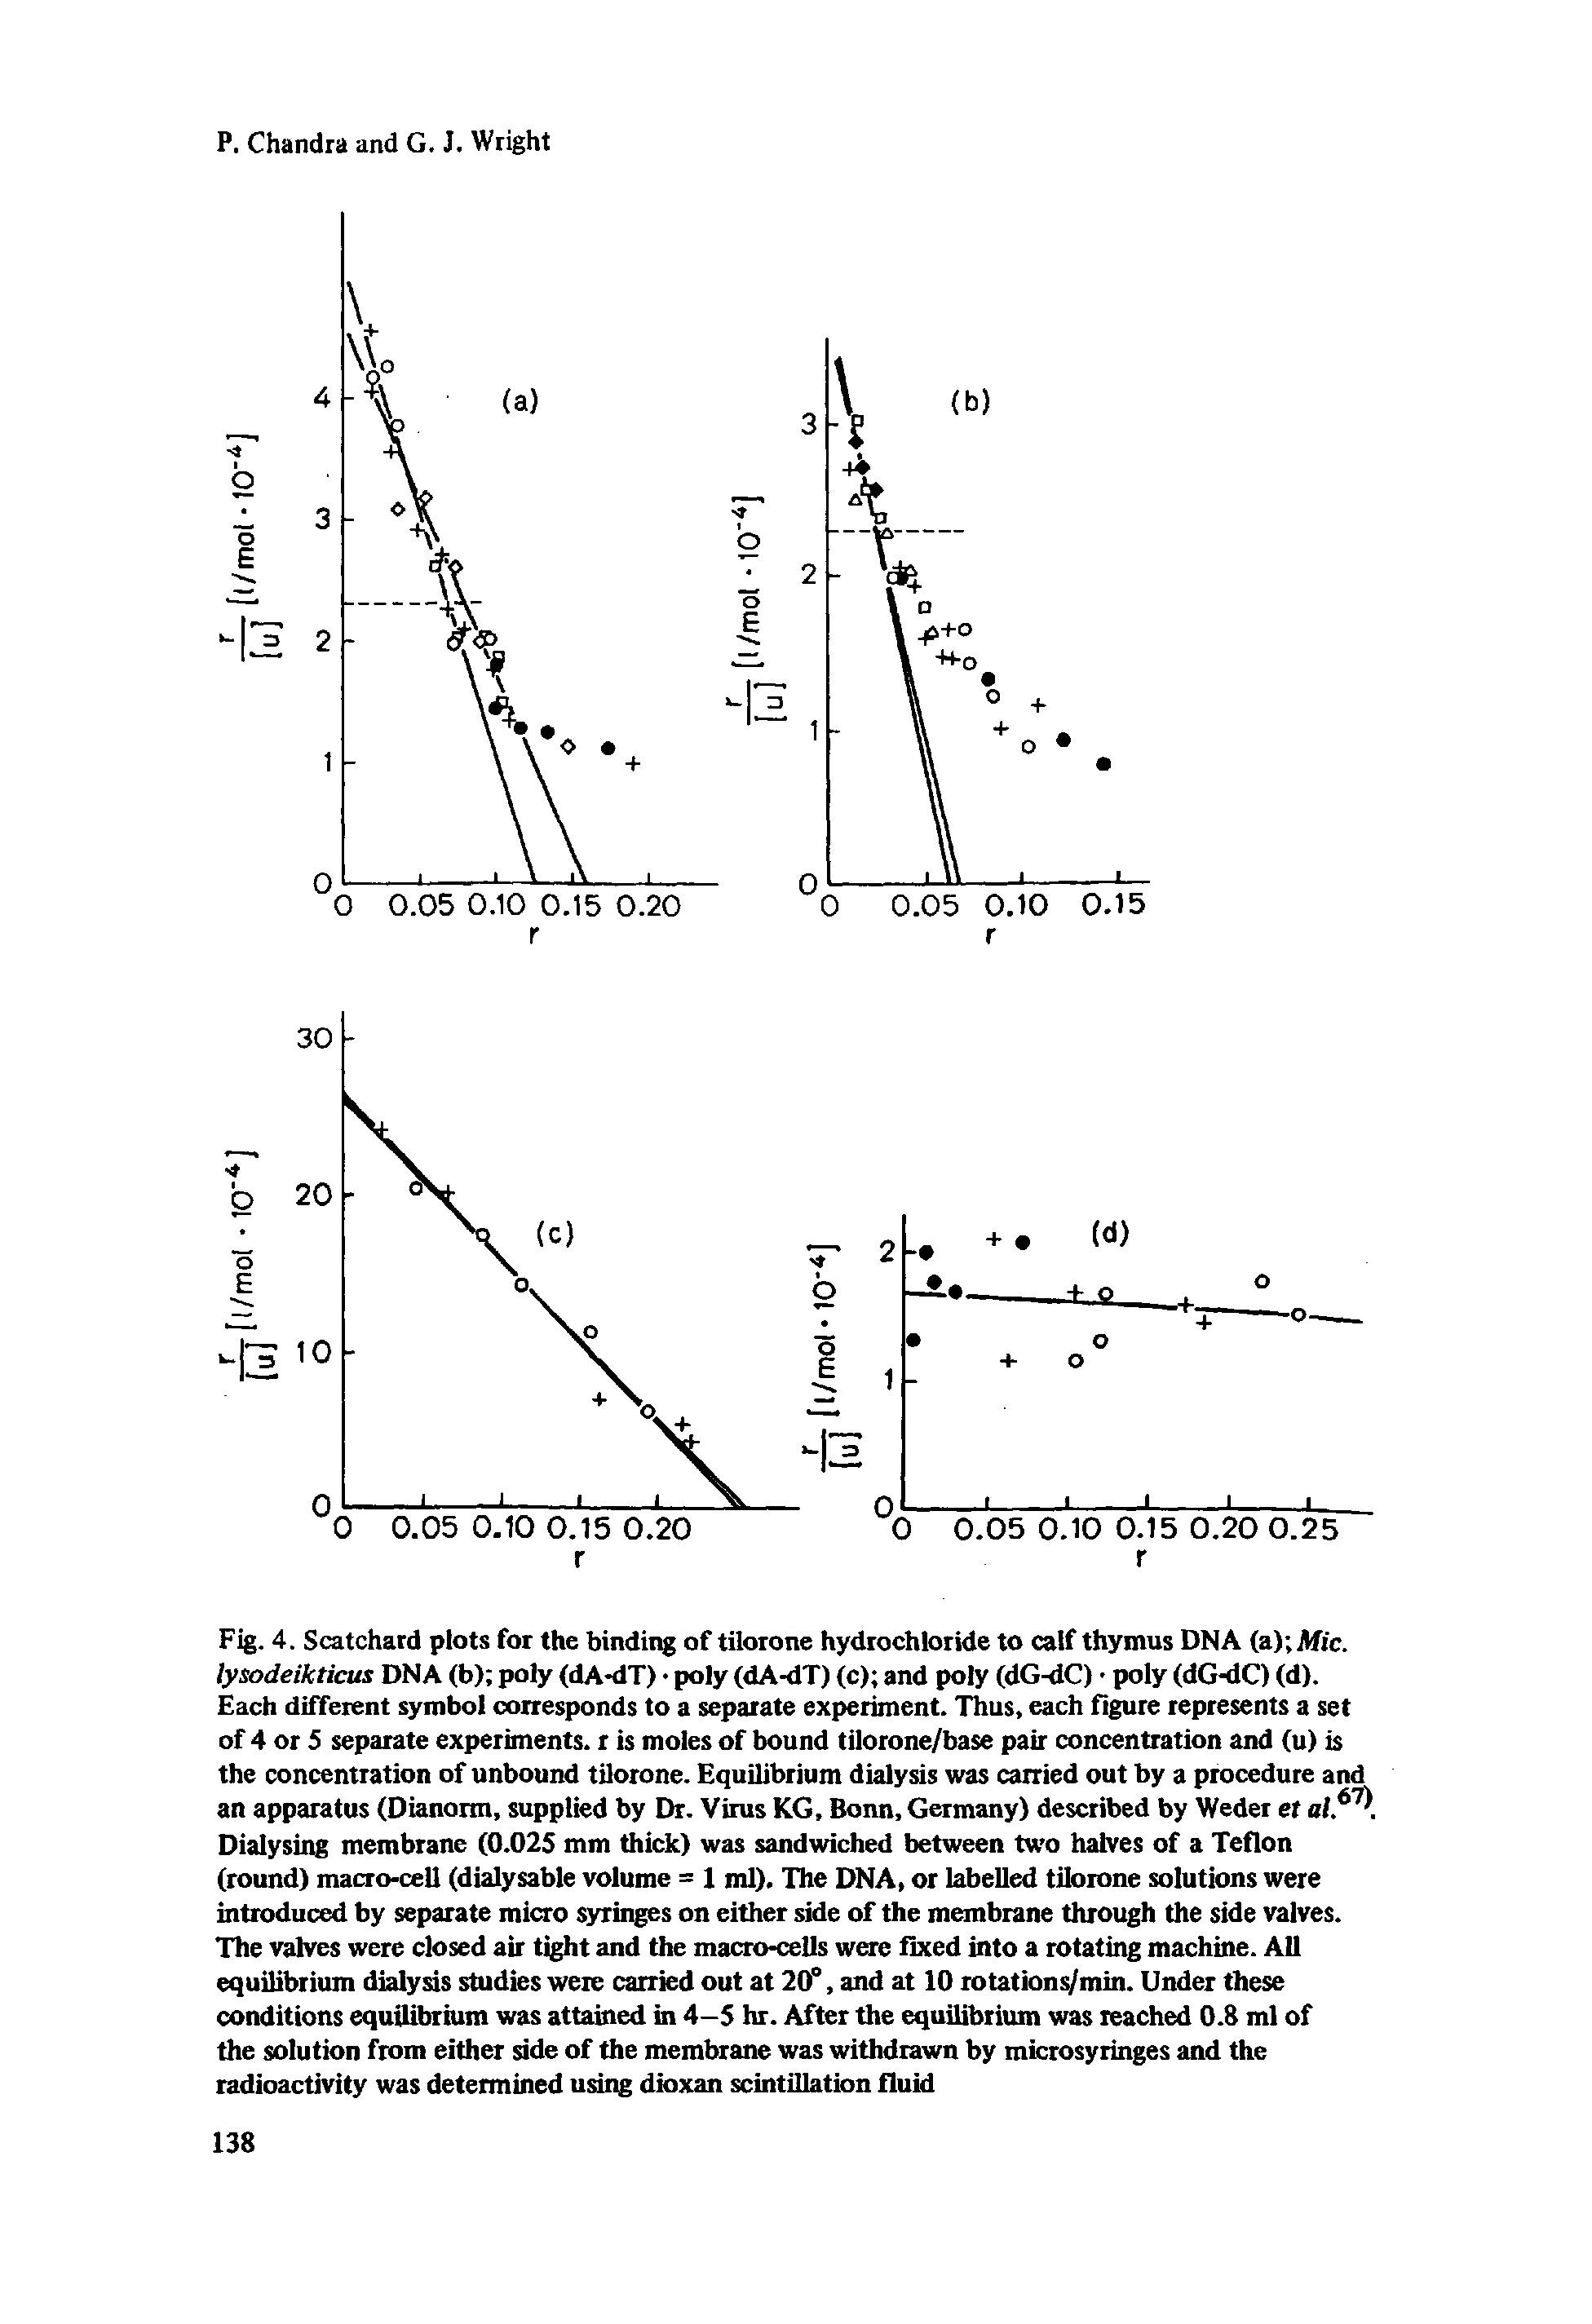 Fig. 4. Scatchard plots for the binding of tilorone hydrochloride to calf thymus DNA (a) Me. lysodeikticus DNA (b) poly (dA-dT) poly (dA-dT) (c) and poly (dG-dC) poly (dG-dC) (d). Each different symbol corresponds to a separate experiment. Thus, each figure represents a set of 4 or 5 separate experiments, r is moles of bound tilorone/base pair concentration and (u) is the concentration of unbound tilorone. Equilibrium dialysis was carried out by a procedure and an apparatus (Dianorm, supplied by Dr. Virus KG, Bonn, Germany) described by Weder et al.61 Dialysing membrane (0.02S mm thick) was sandwiched between two halves of a Teflon (round) macro-cell (dialysable volume = 1 ml). The DNA, or labelled tilorone solutions were introduced by separate micro syringes on either side of the membrane through the side valves. The valves were closed air tight and the macro-cells were fixed into a rotating machine. All equilibrium dialysis studies were carried out at 20°, and at 10 rotations/min. Under these conditions equilibrium was attained in 4-5 hr. After the equilibrium was reached 0.8 ml of the solution from either side of the membrane was withdrawn by microsyringes and the radioactivity was determined using dioxan scintillation fluid...